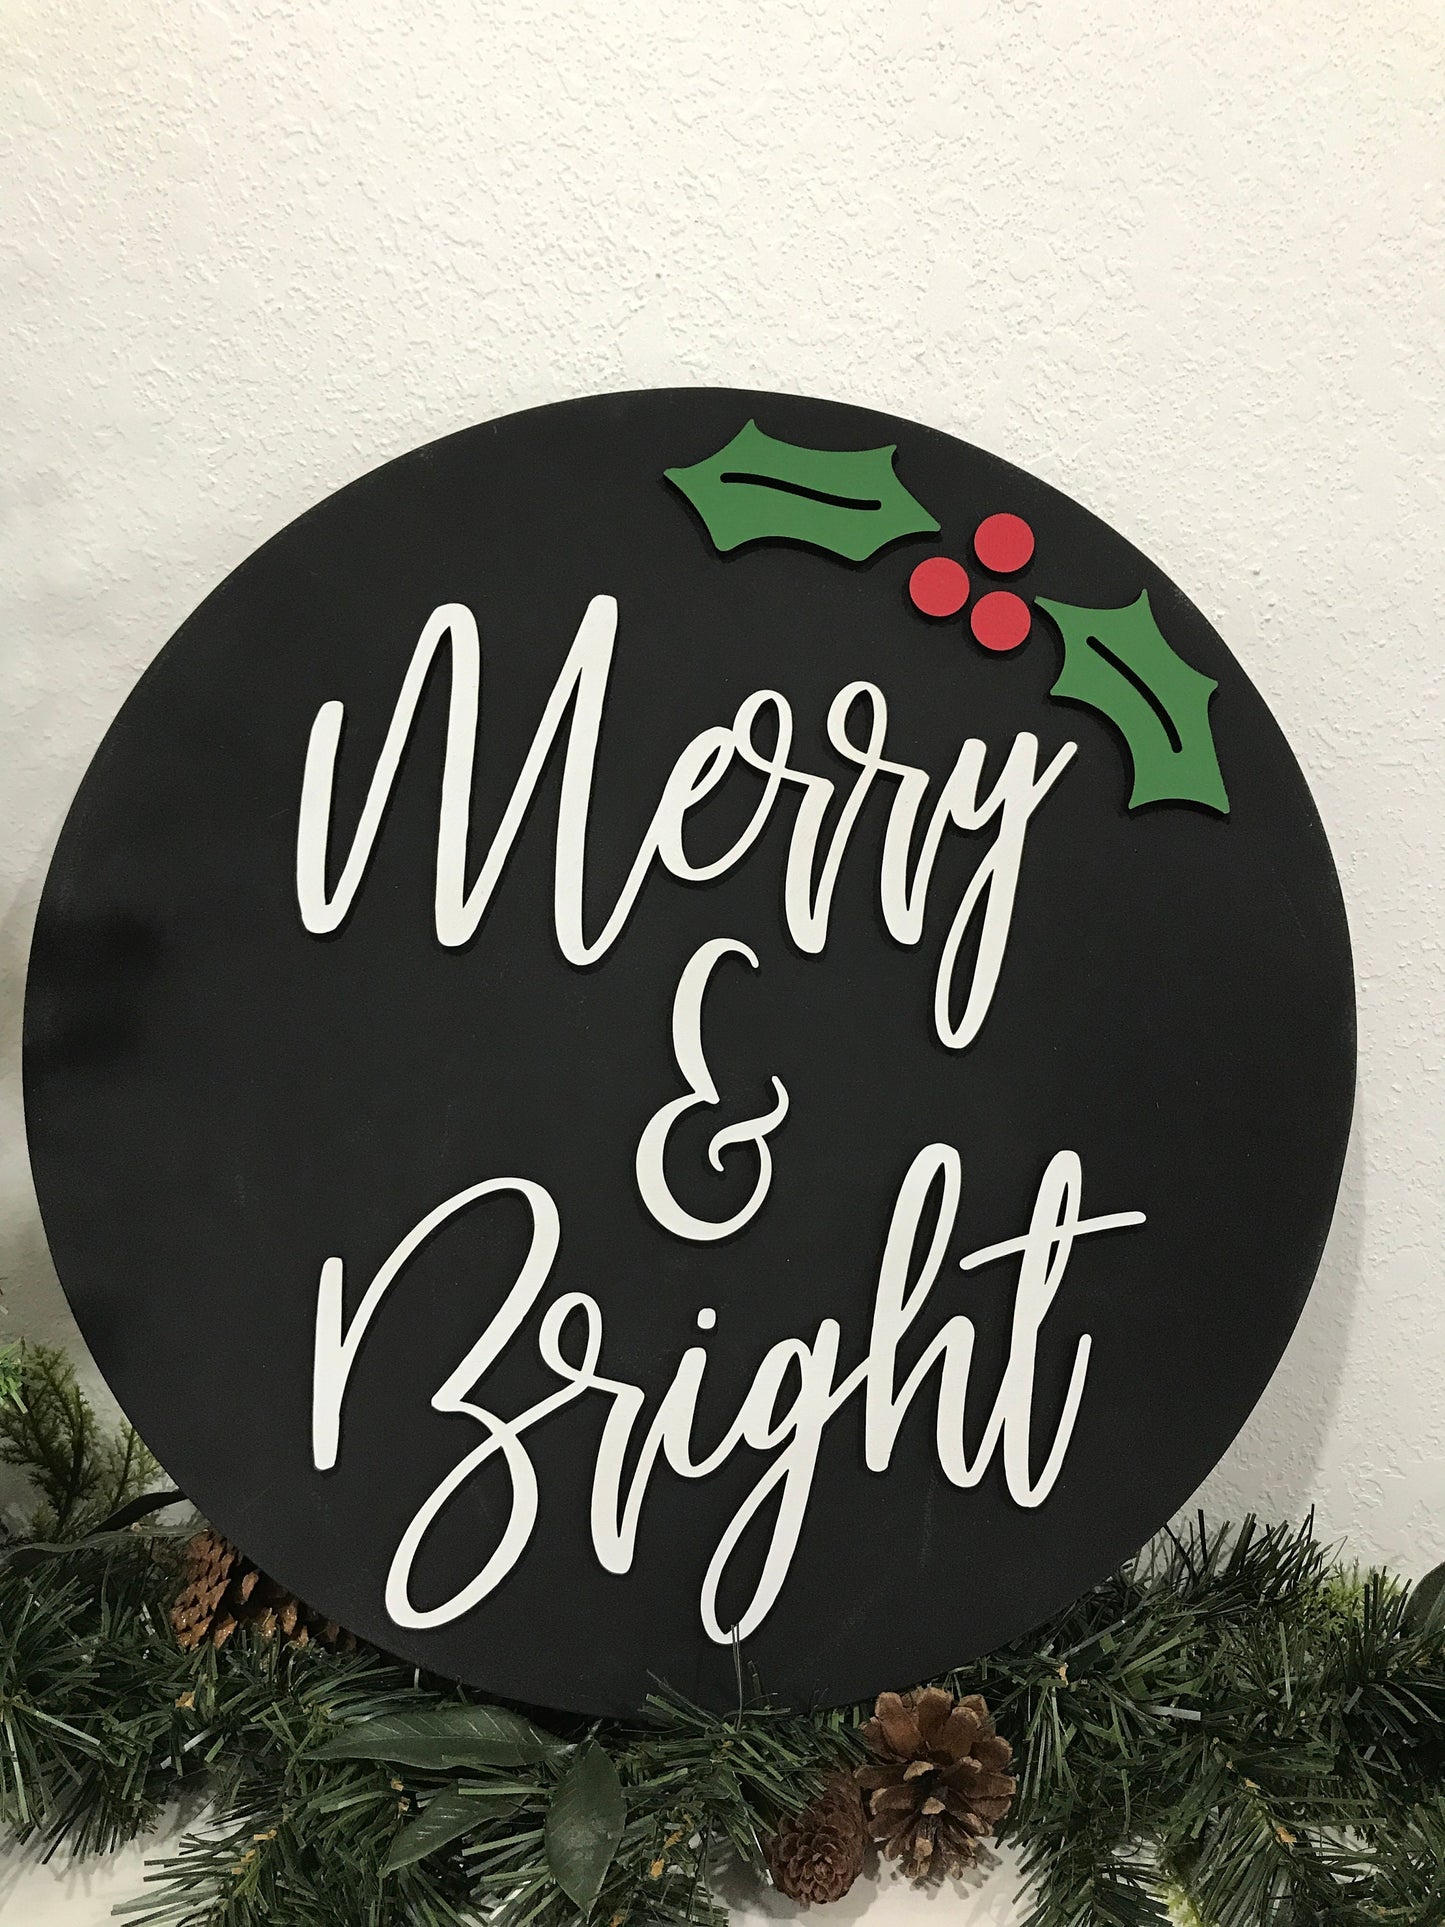 Merry & bright sign, Christmas decorations, 3D holiday decor, wood signs, living room wooden sign wall hanging, holly leaves mantel decor